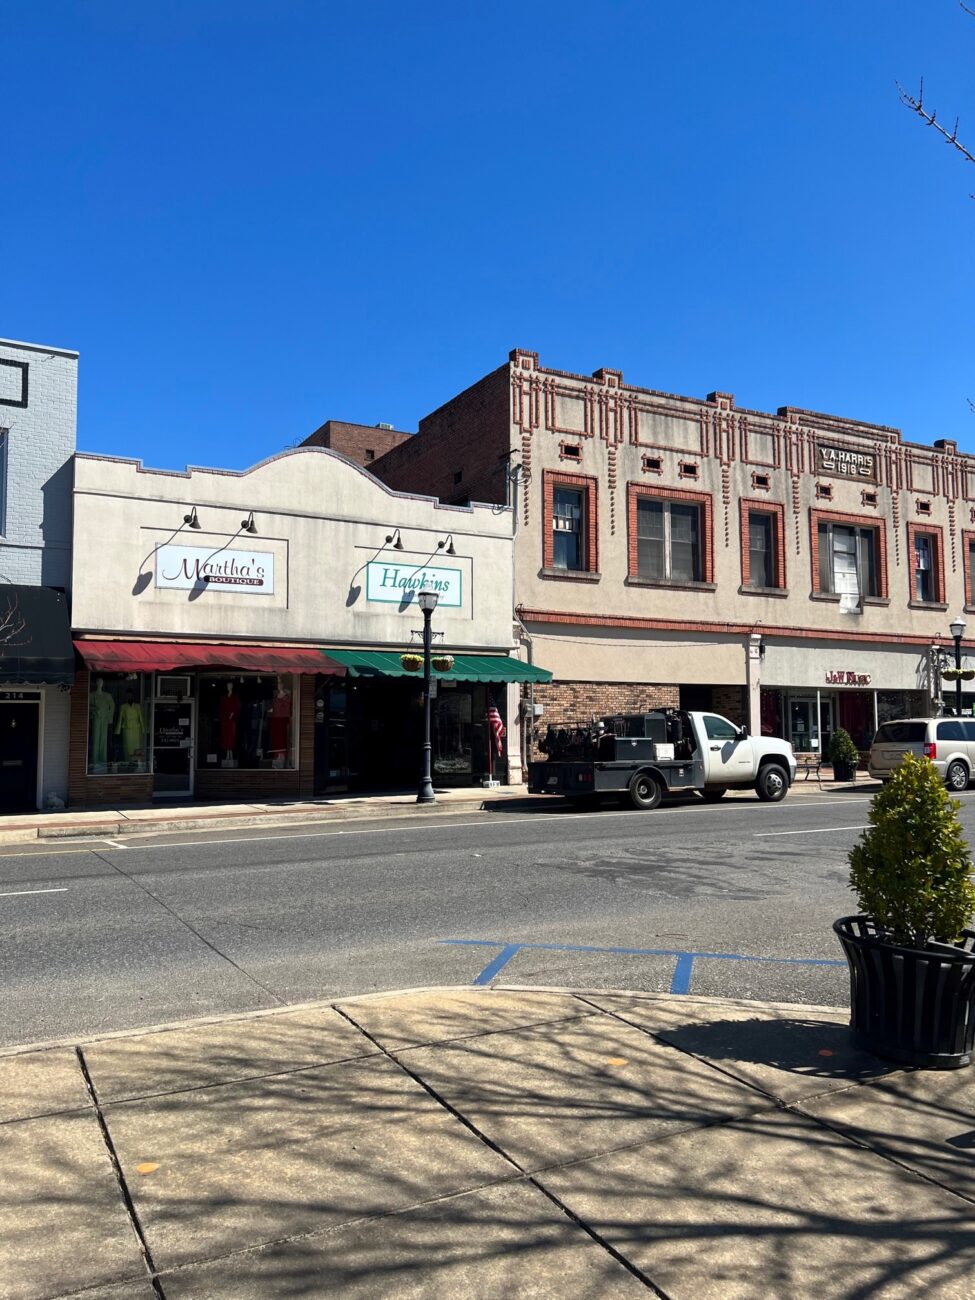 Making real change in Ruston: a Main Street model for racial reconciliation